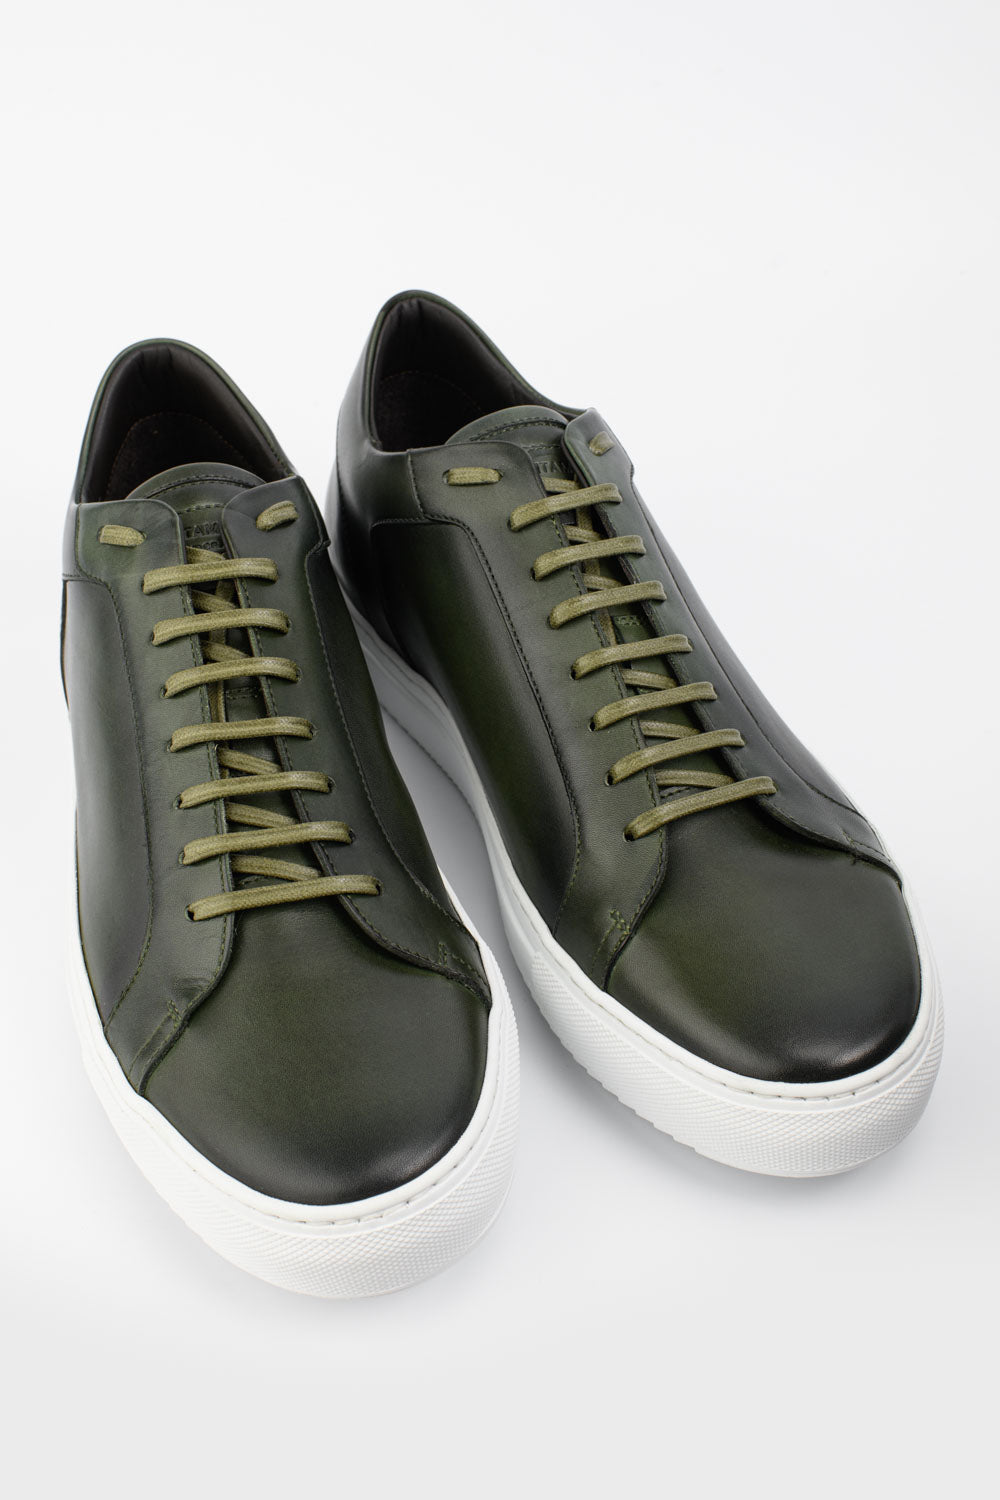 SOHO forest-green patina sneakers.